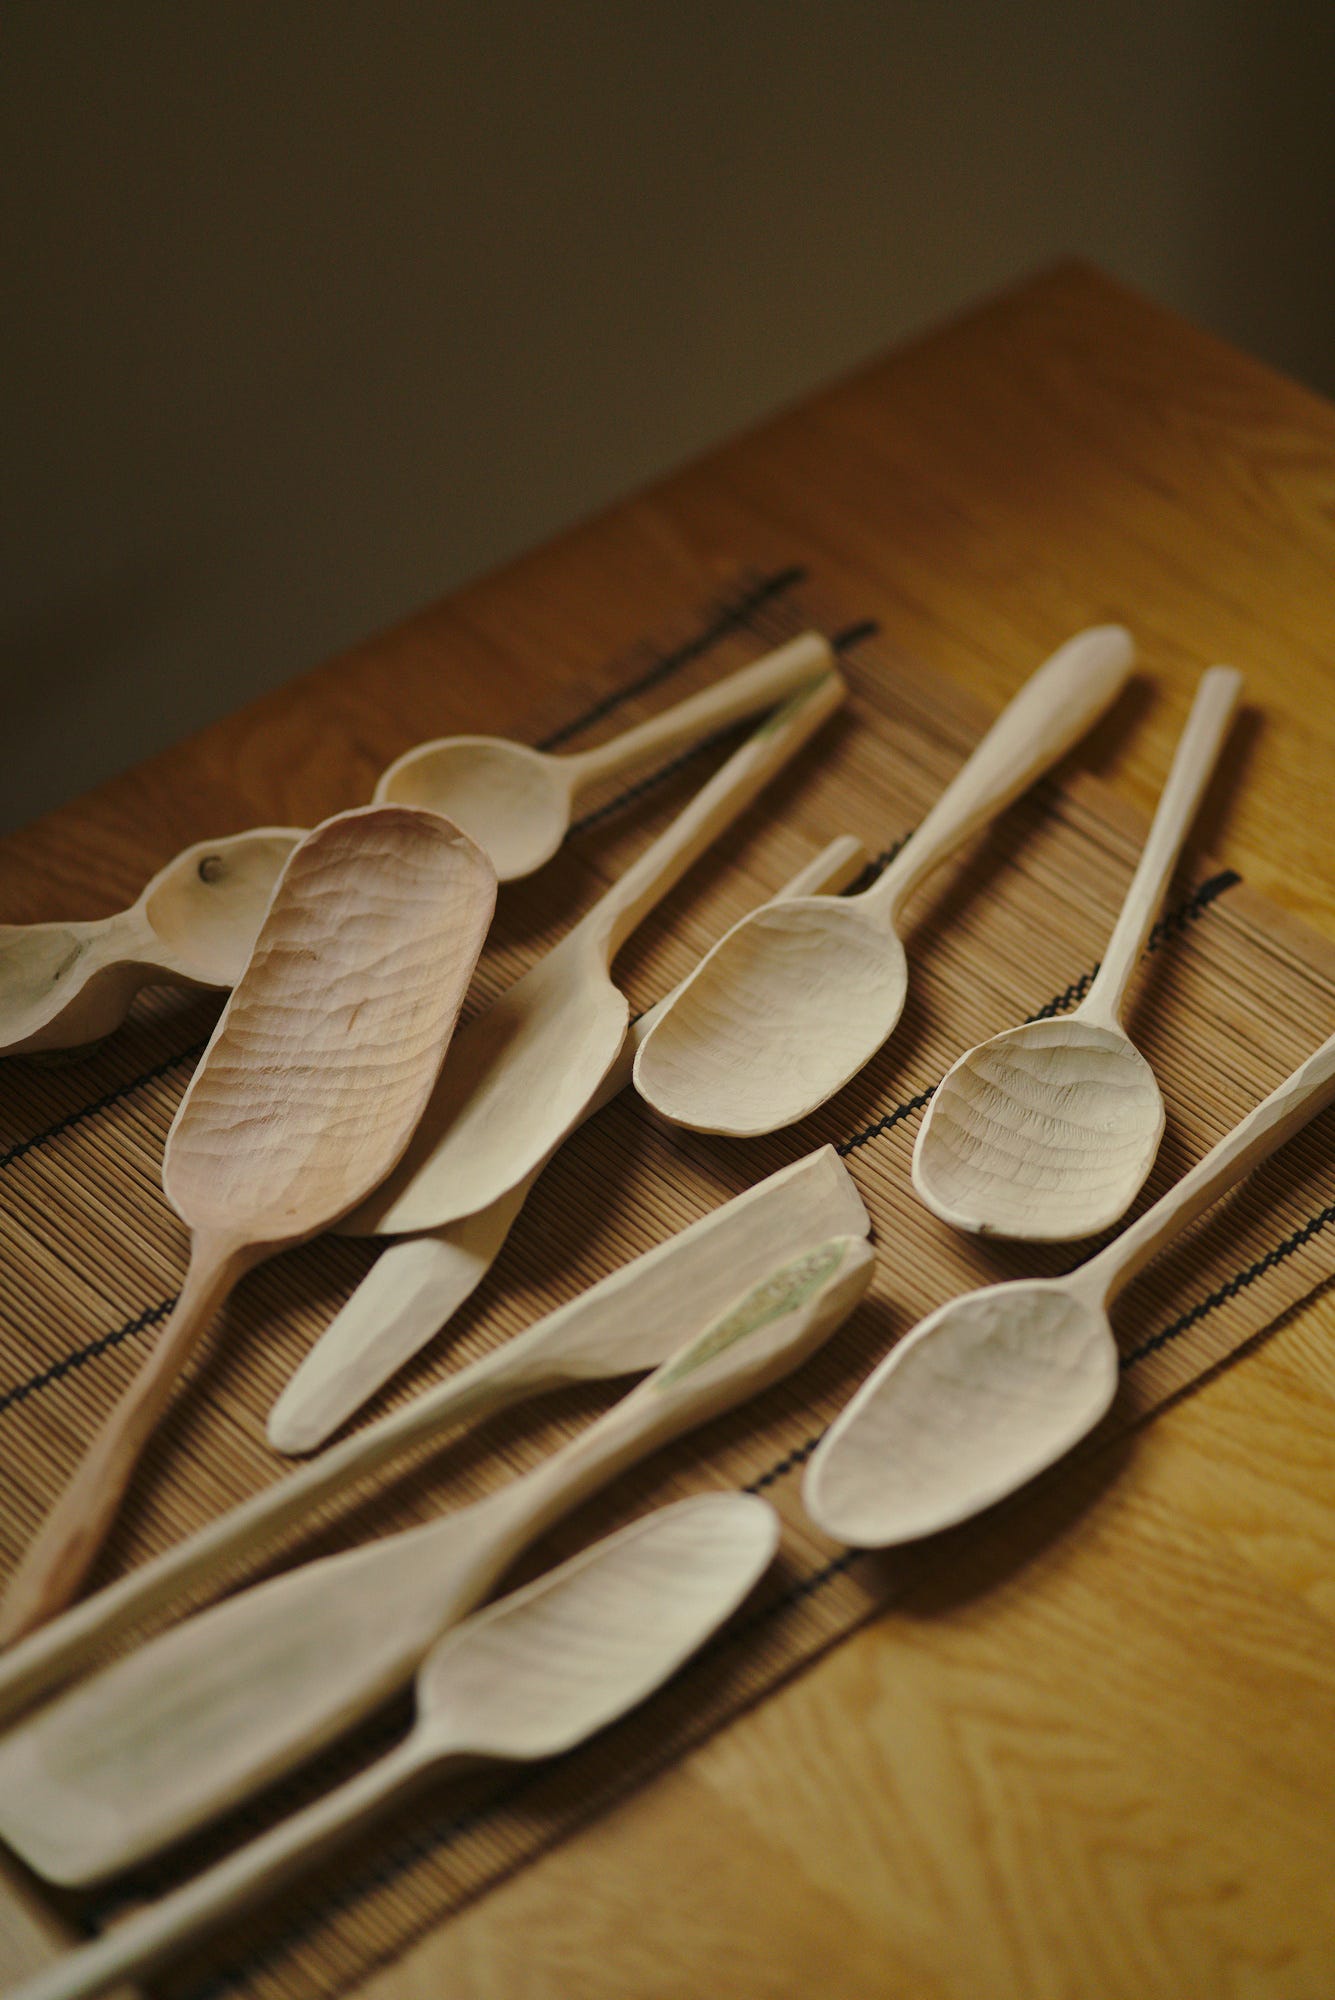 A pile of recently carved large cooking spoons and spatulas, waiting for branding, sanding, and finishing.